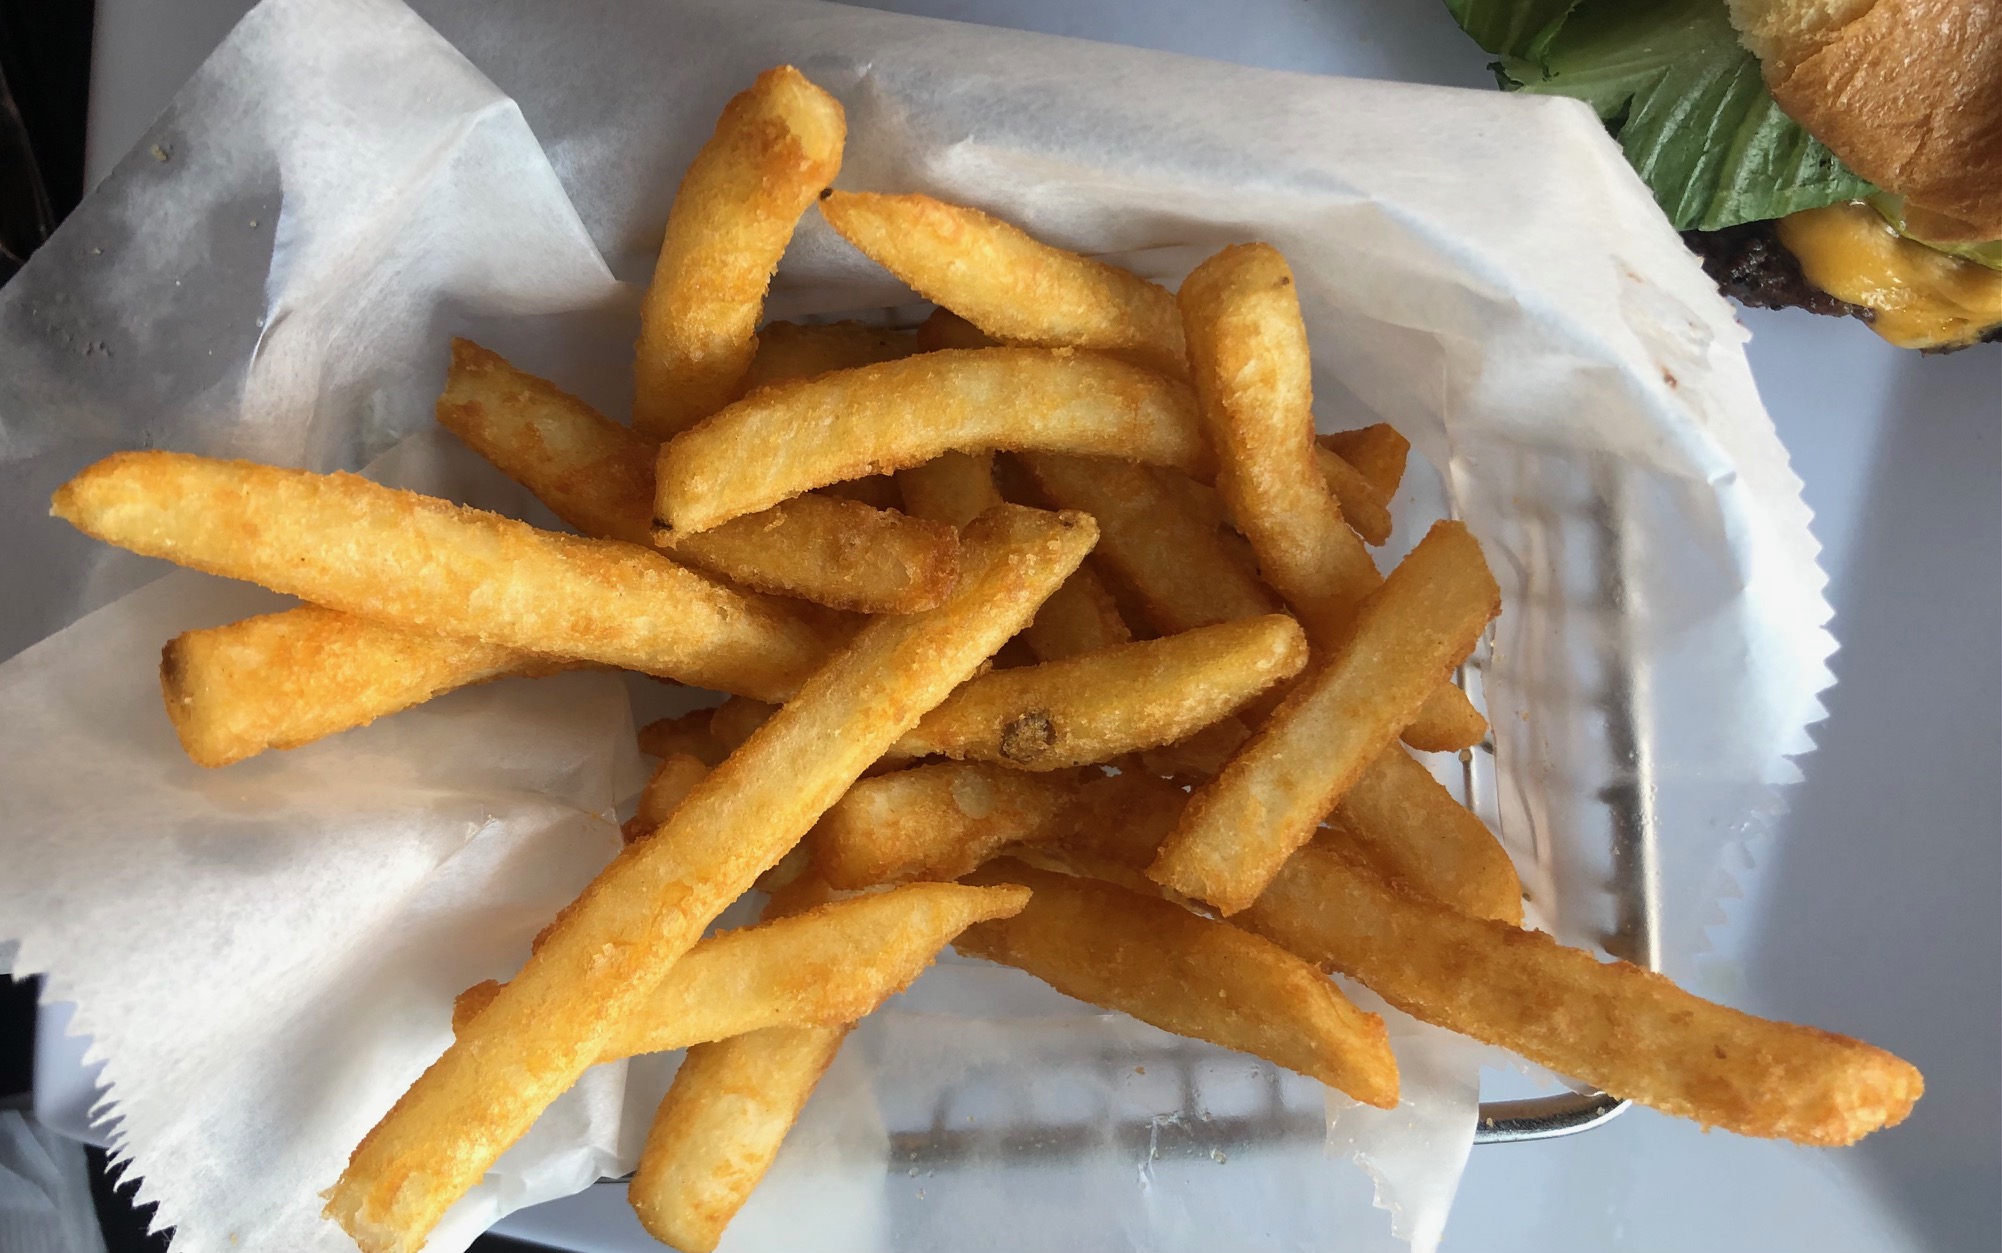 An overhead photo shows freshly fried fries in a metal basket lined with parchment paper. Photo by Alyssa Buckley.